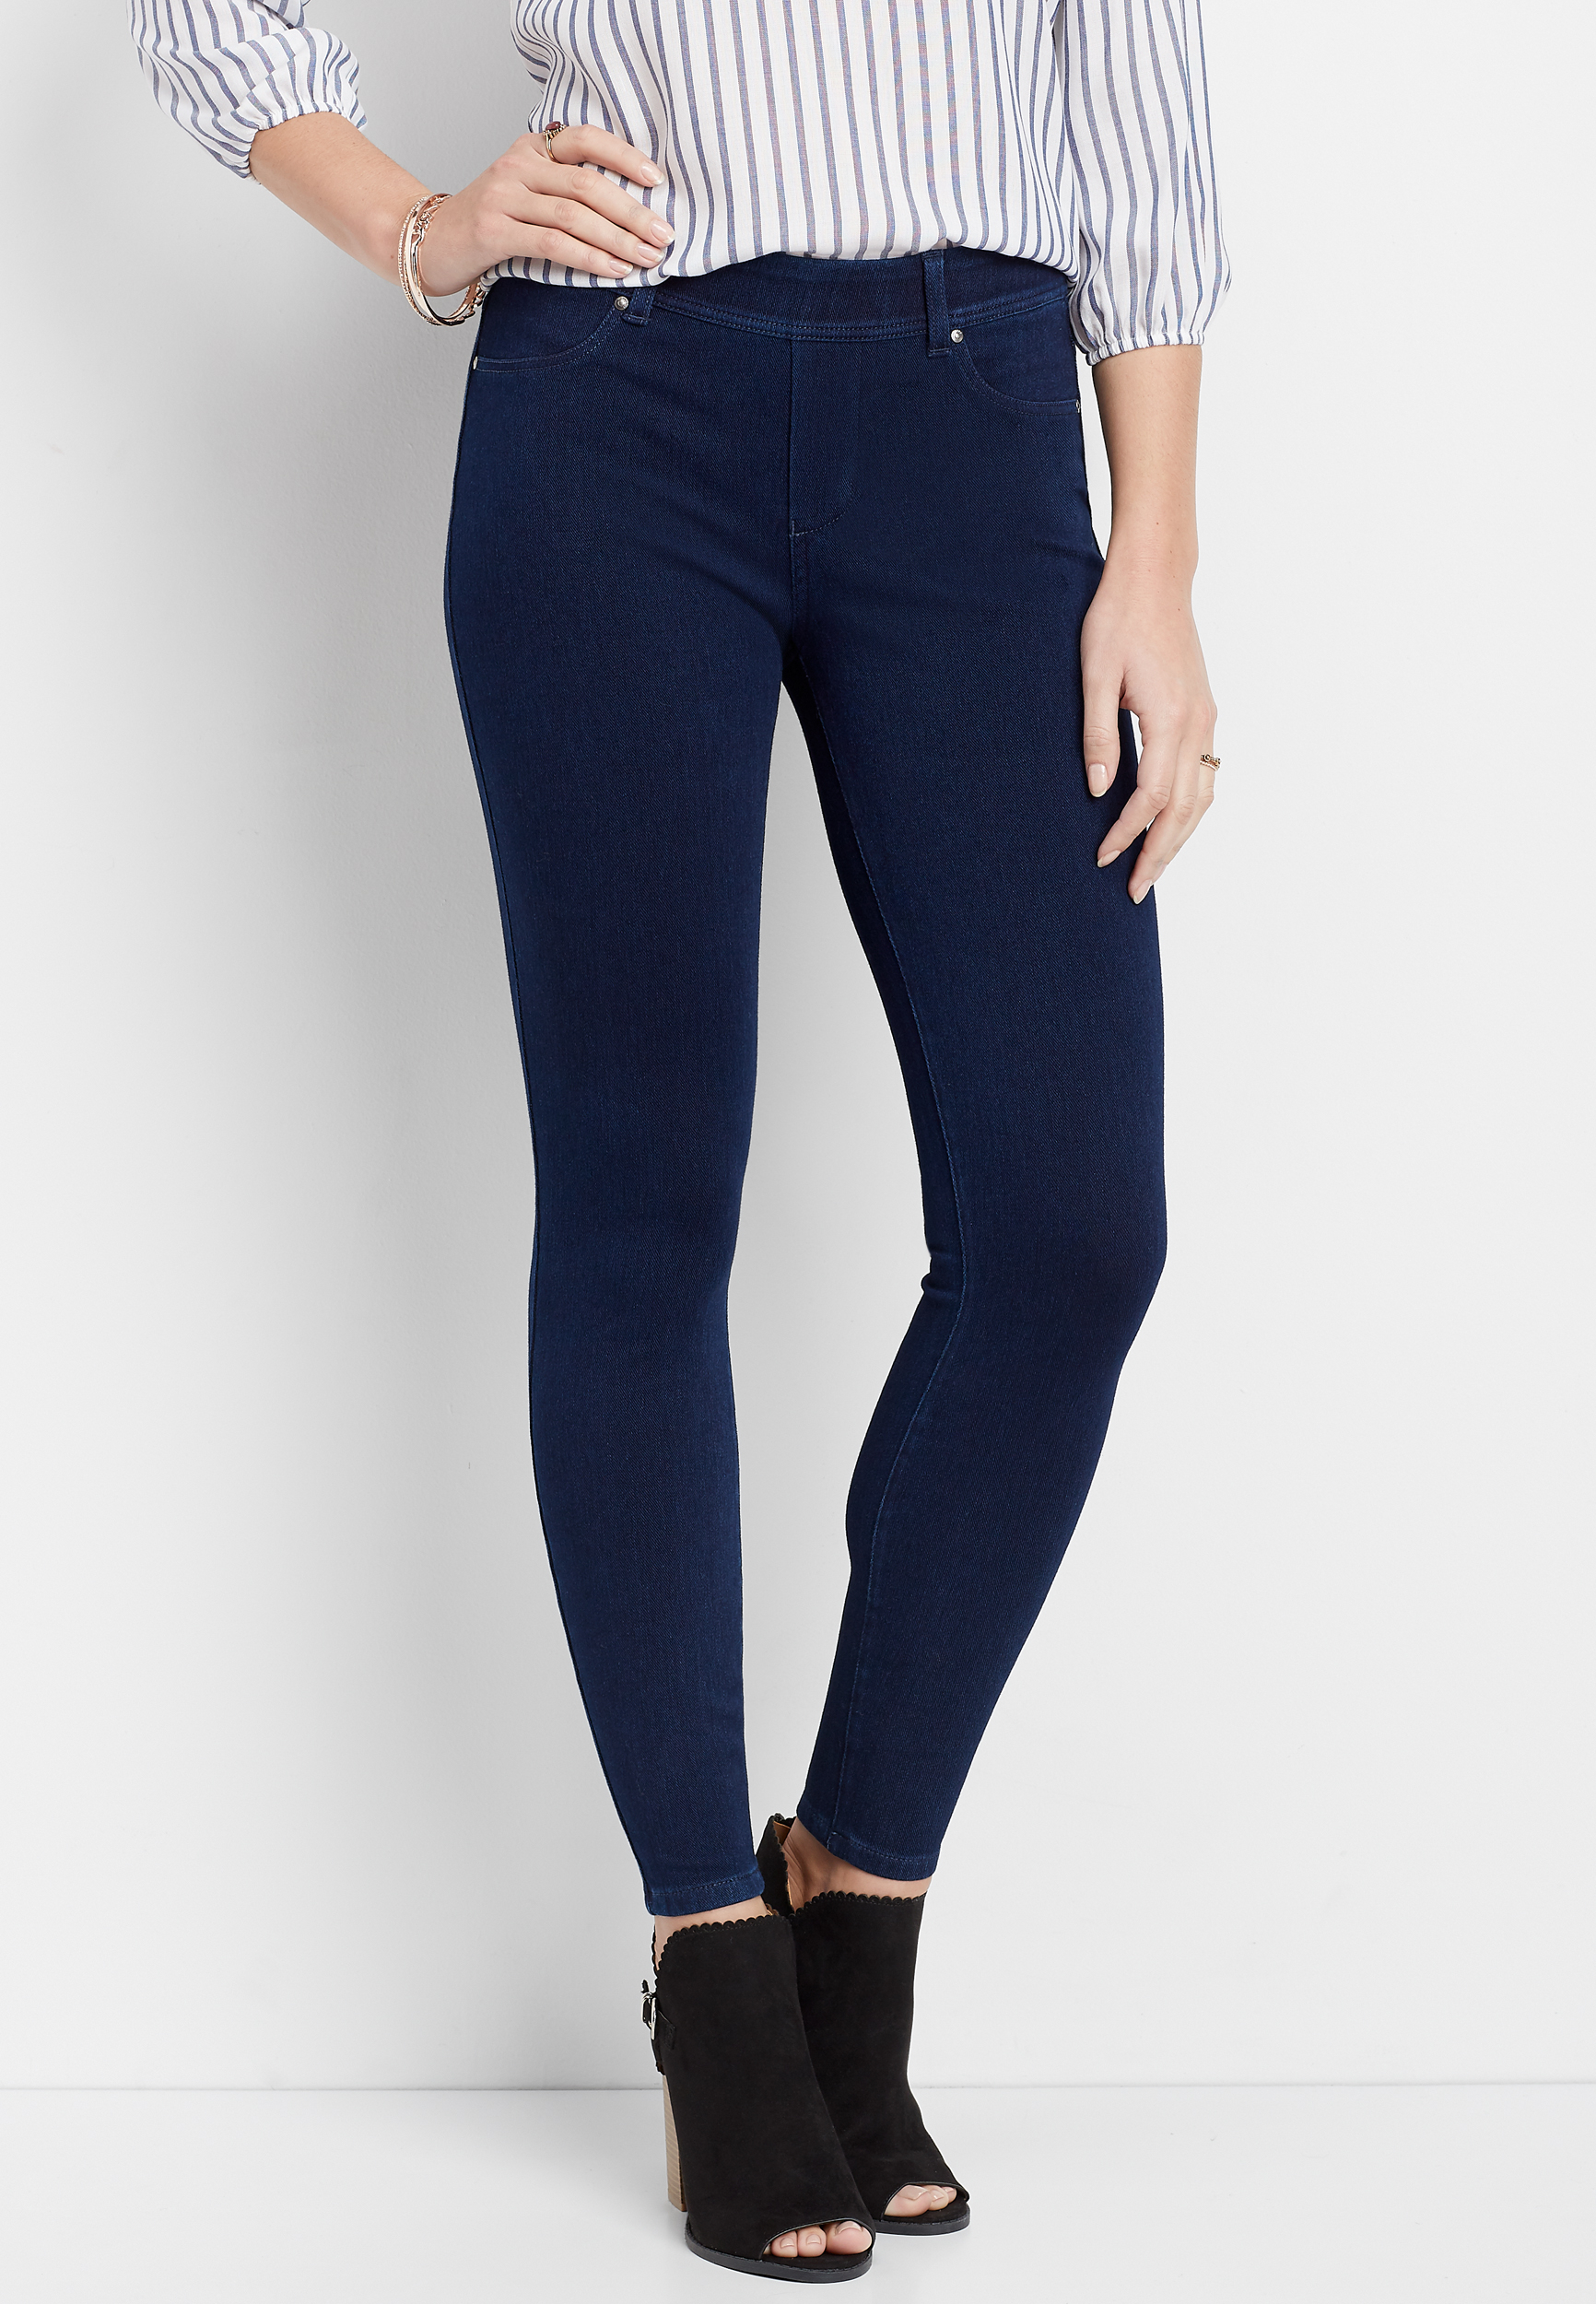 knit denim pull on pant | maurices